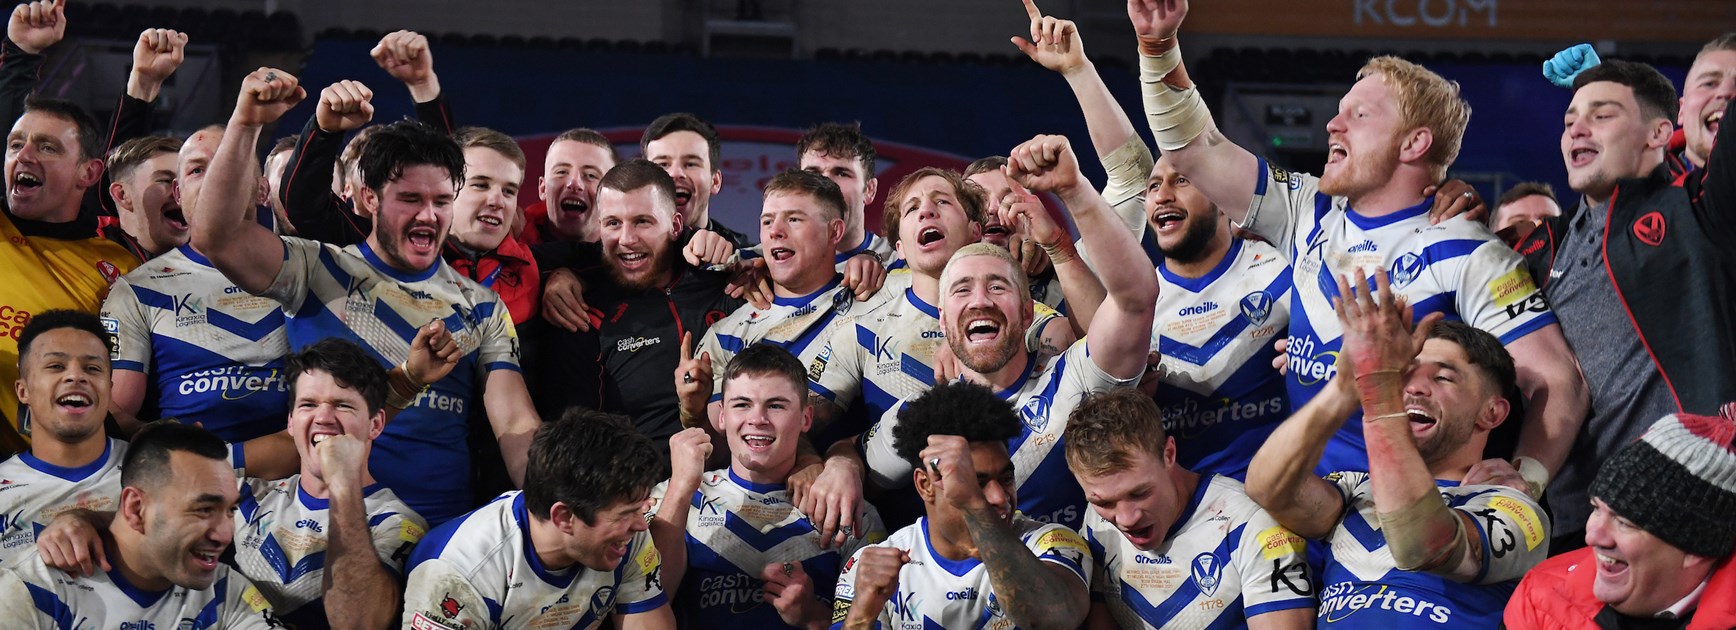 St Helens players celebrate winning the 2020 Super League title.